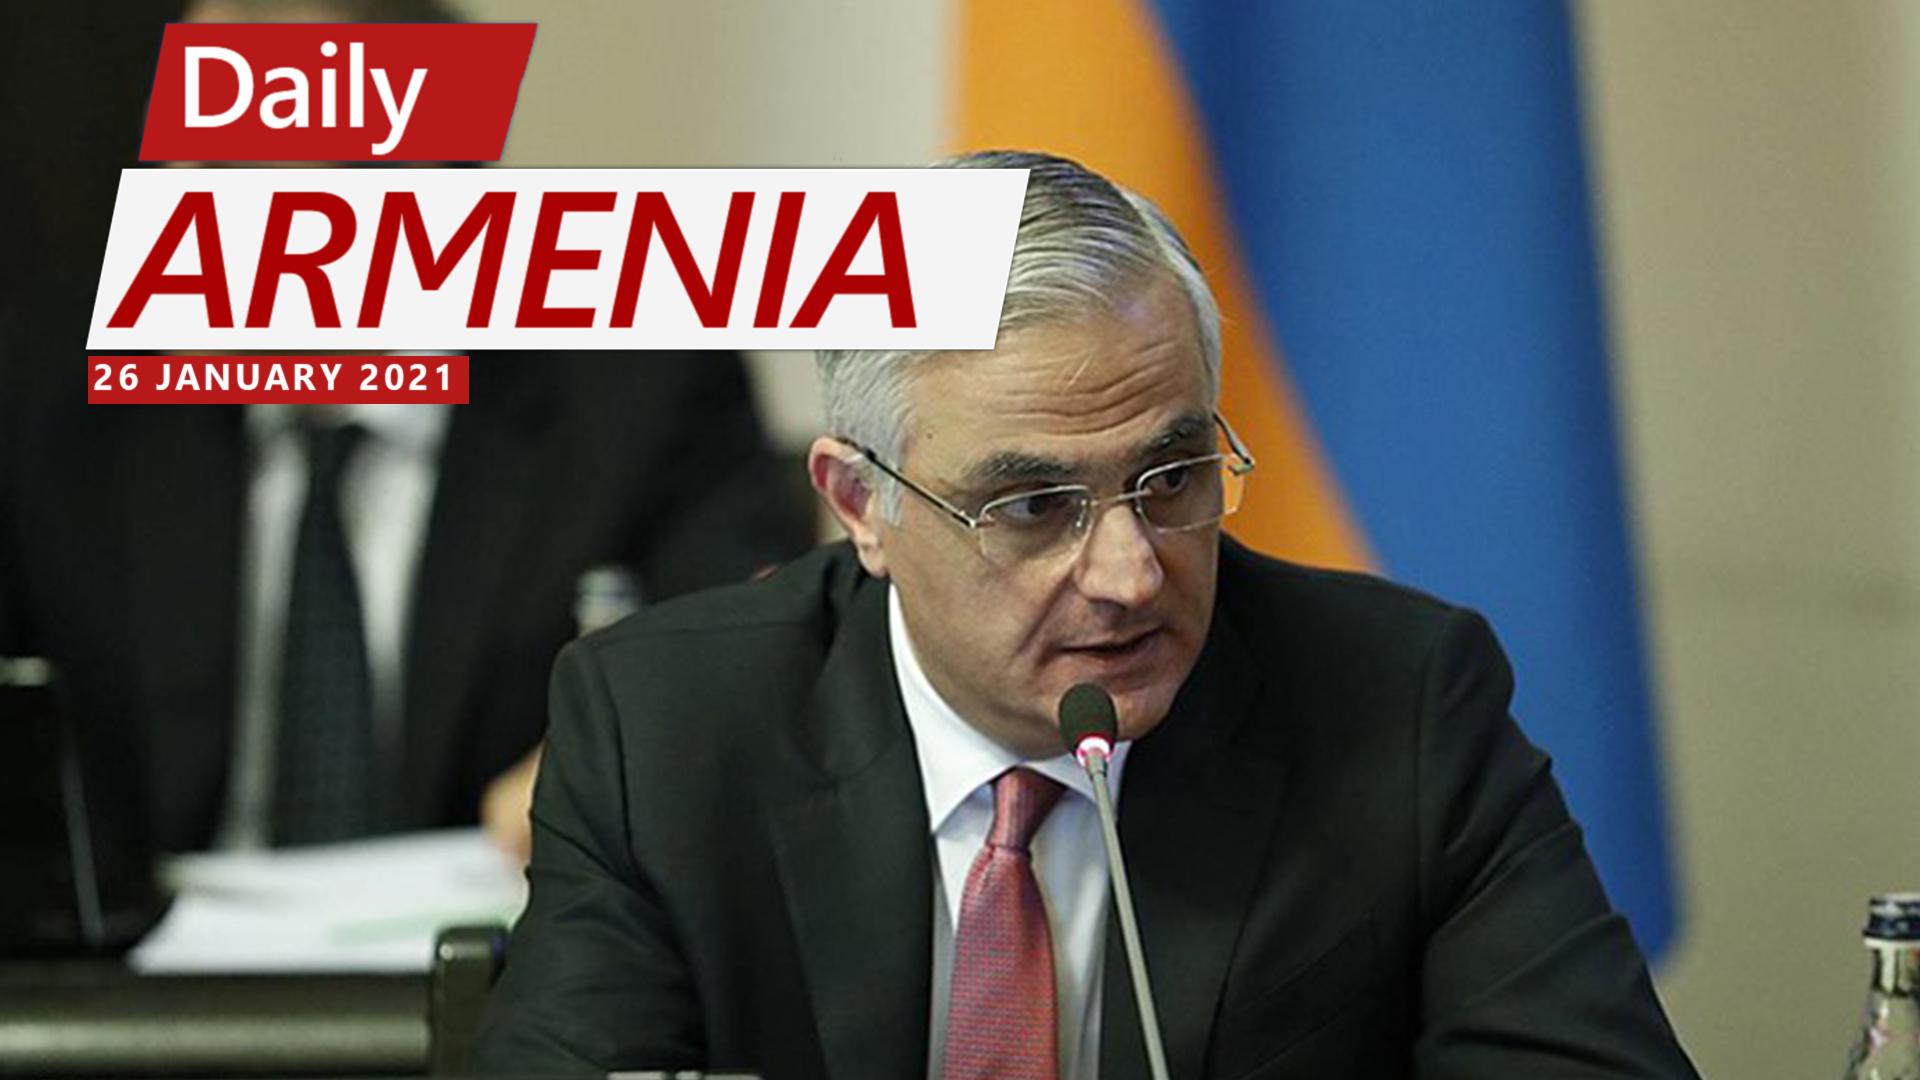 The Deputy PMs of Armenia, Azerbaijan and Russia to Meet in Coming Days